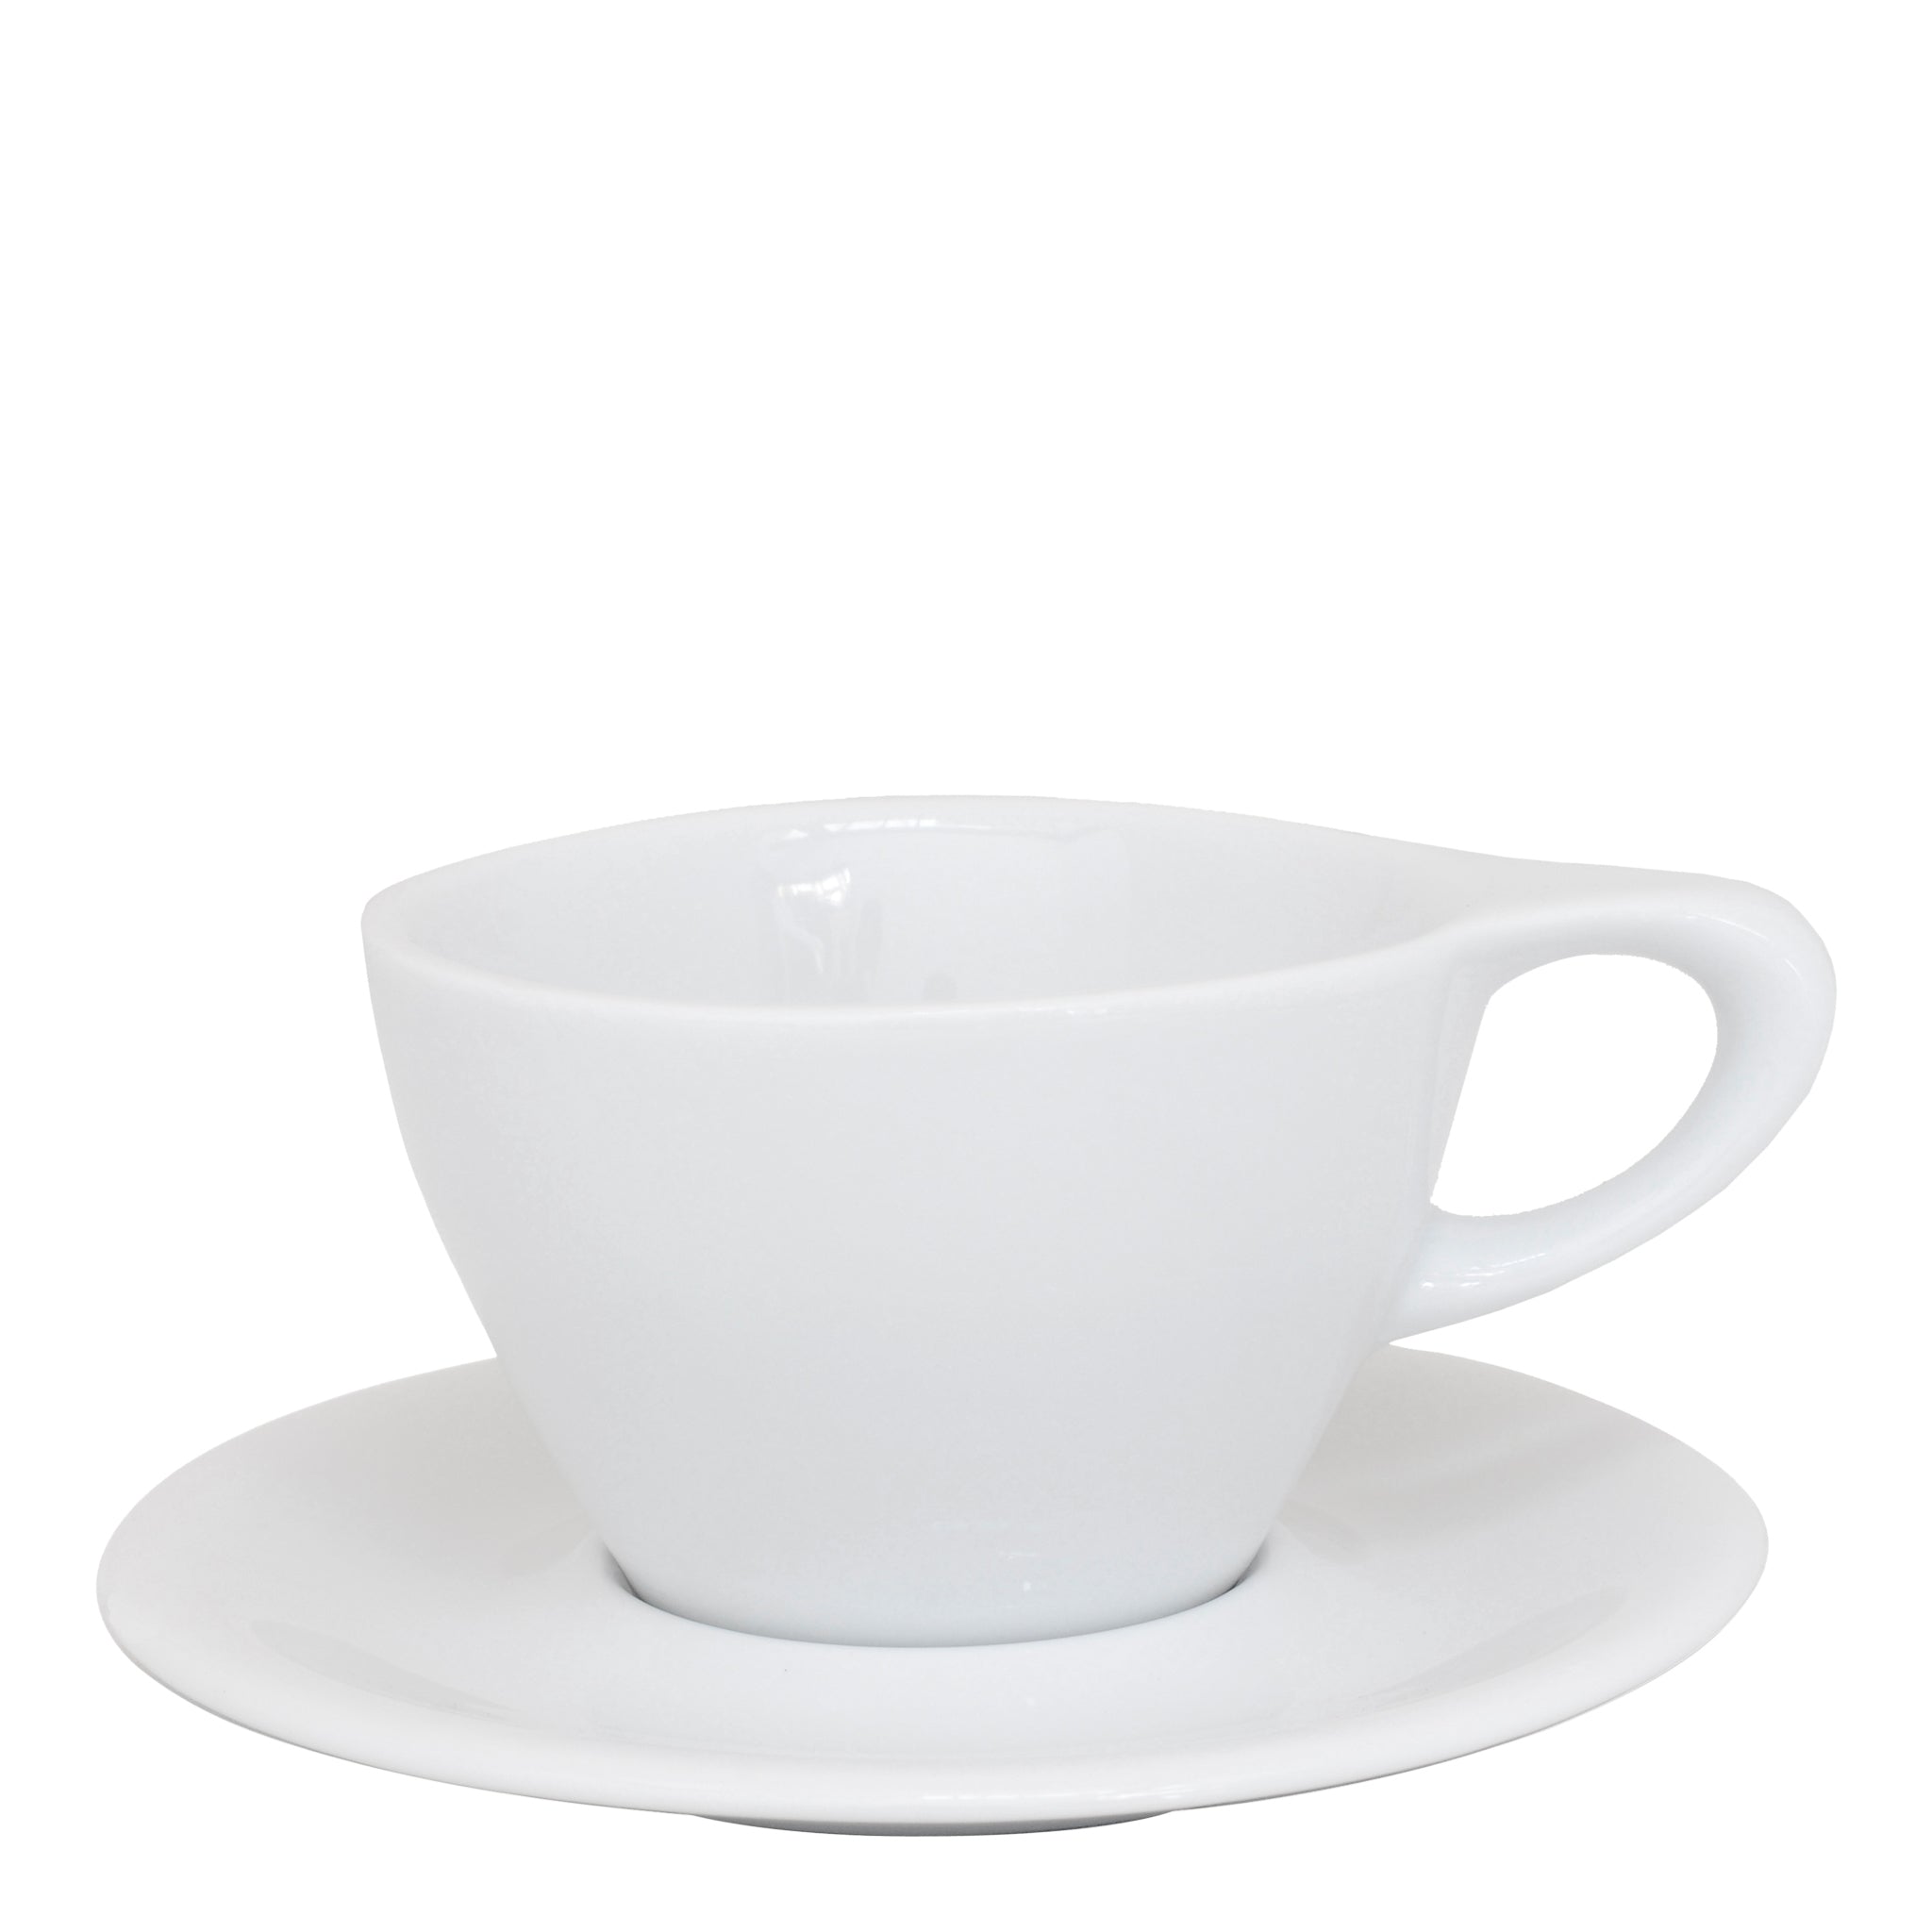 notNeutral LINO 10 oz Porcelain Coffee Cups | for Specialty Coffee Drinks,  Latte, Cappuccino, Mocha …See more notNeutral LINO 10 oz Porcelain Coffee